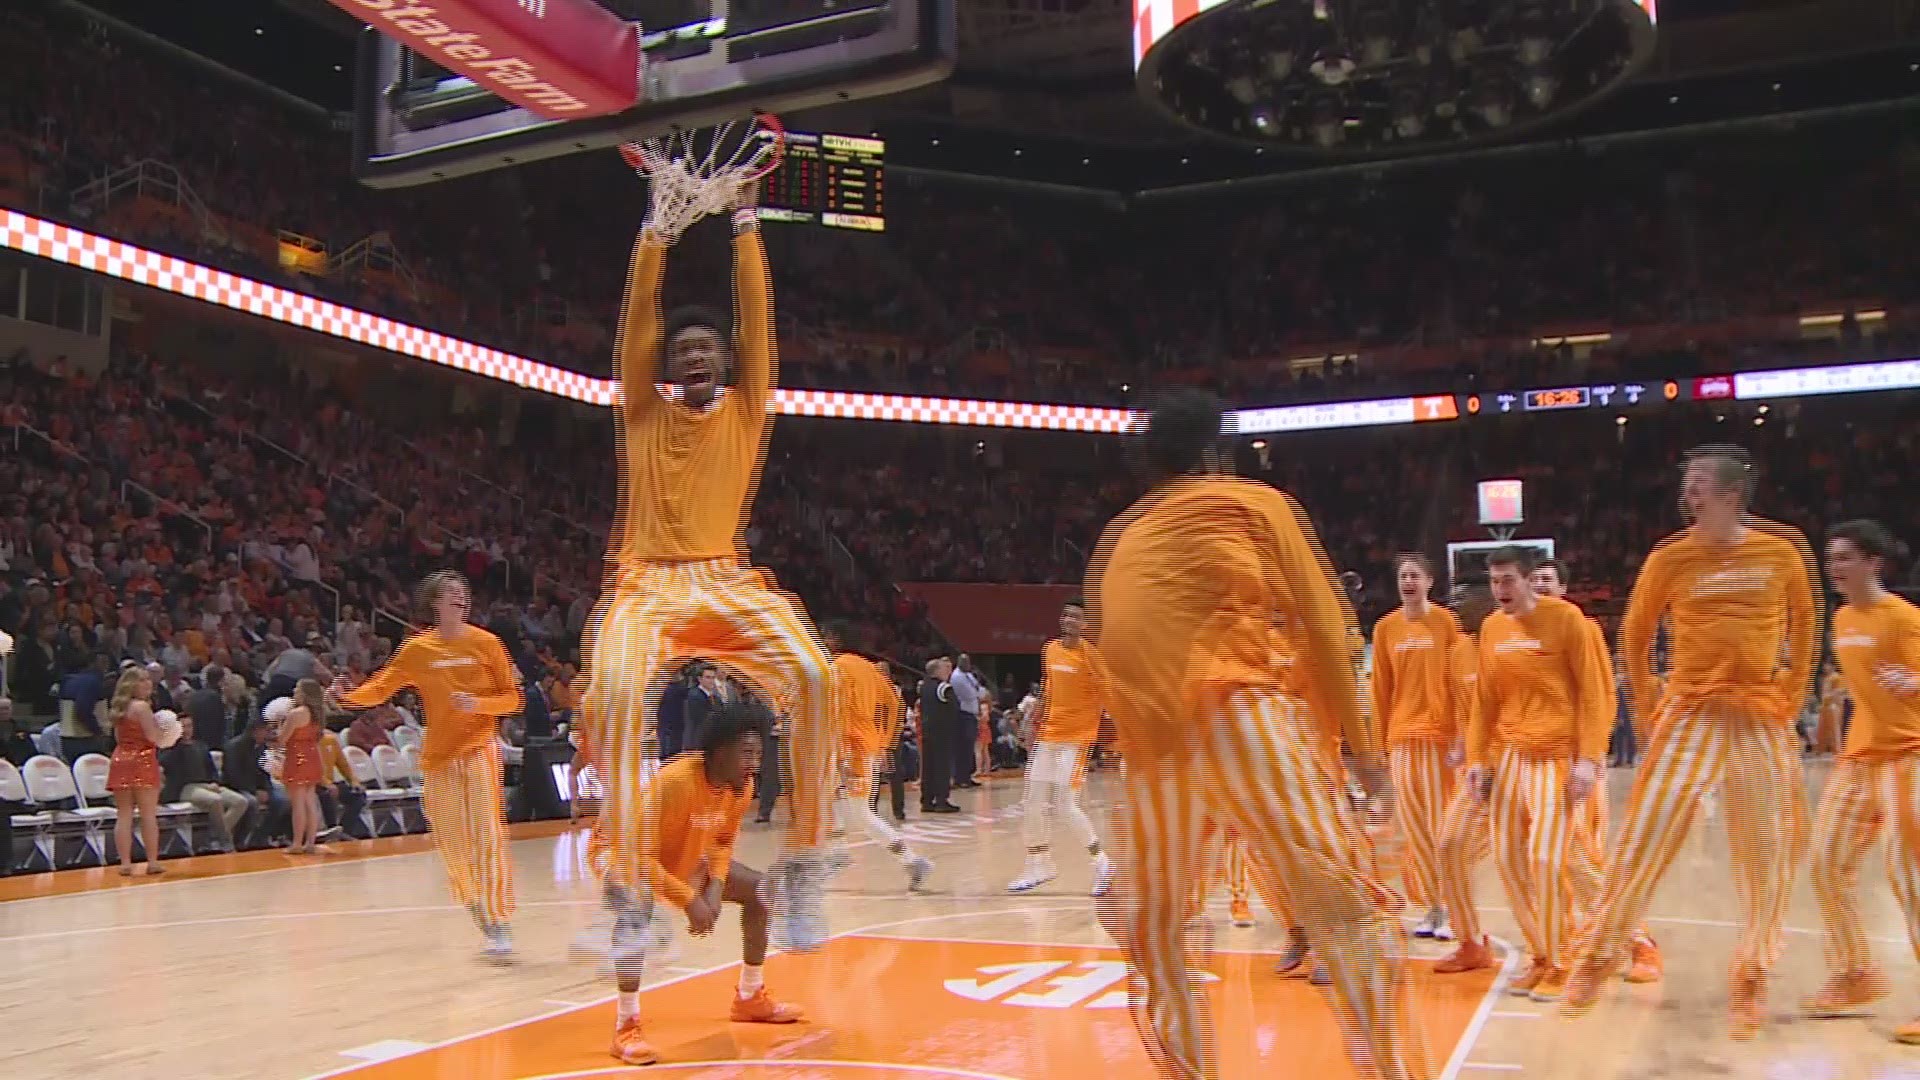 Four seniors with the Tennessee Men's team were saluted as they played their final game in TBA Tuesday night.